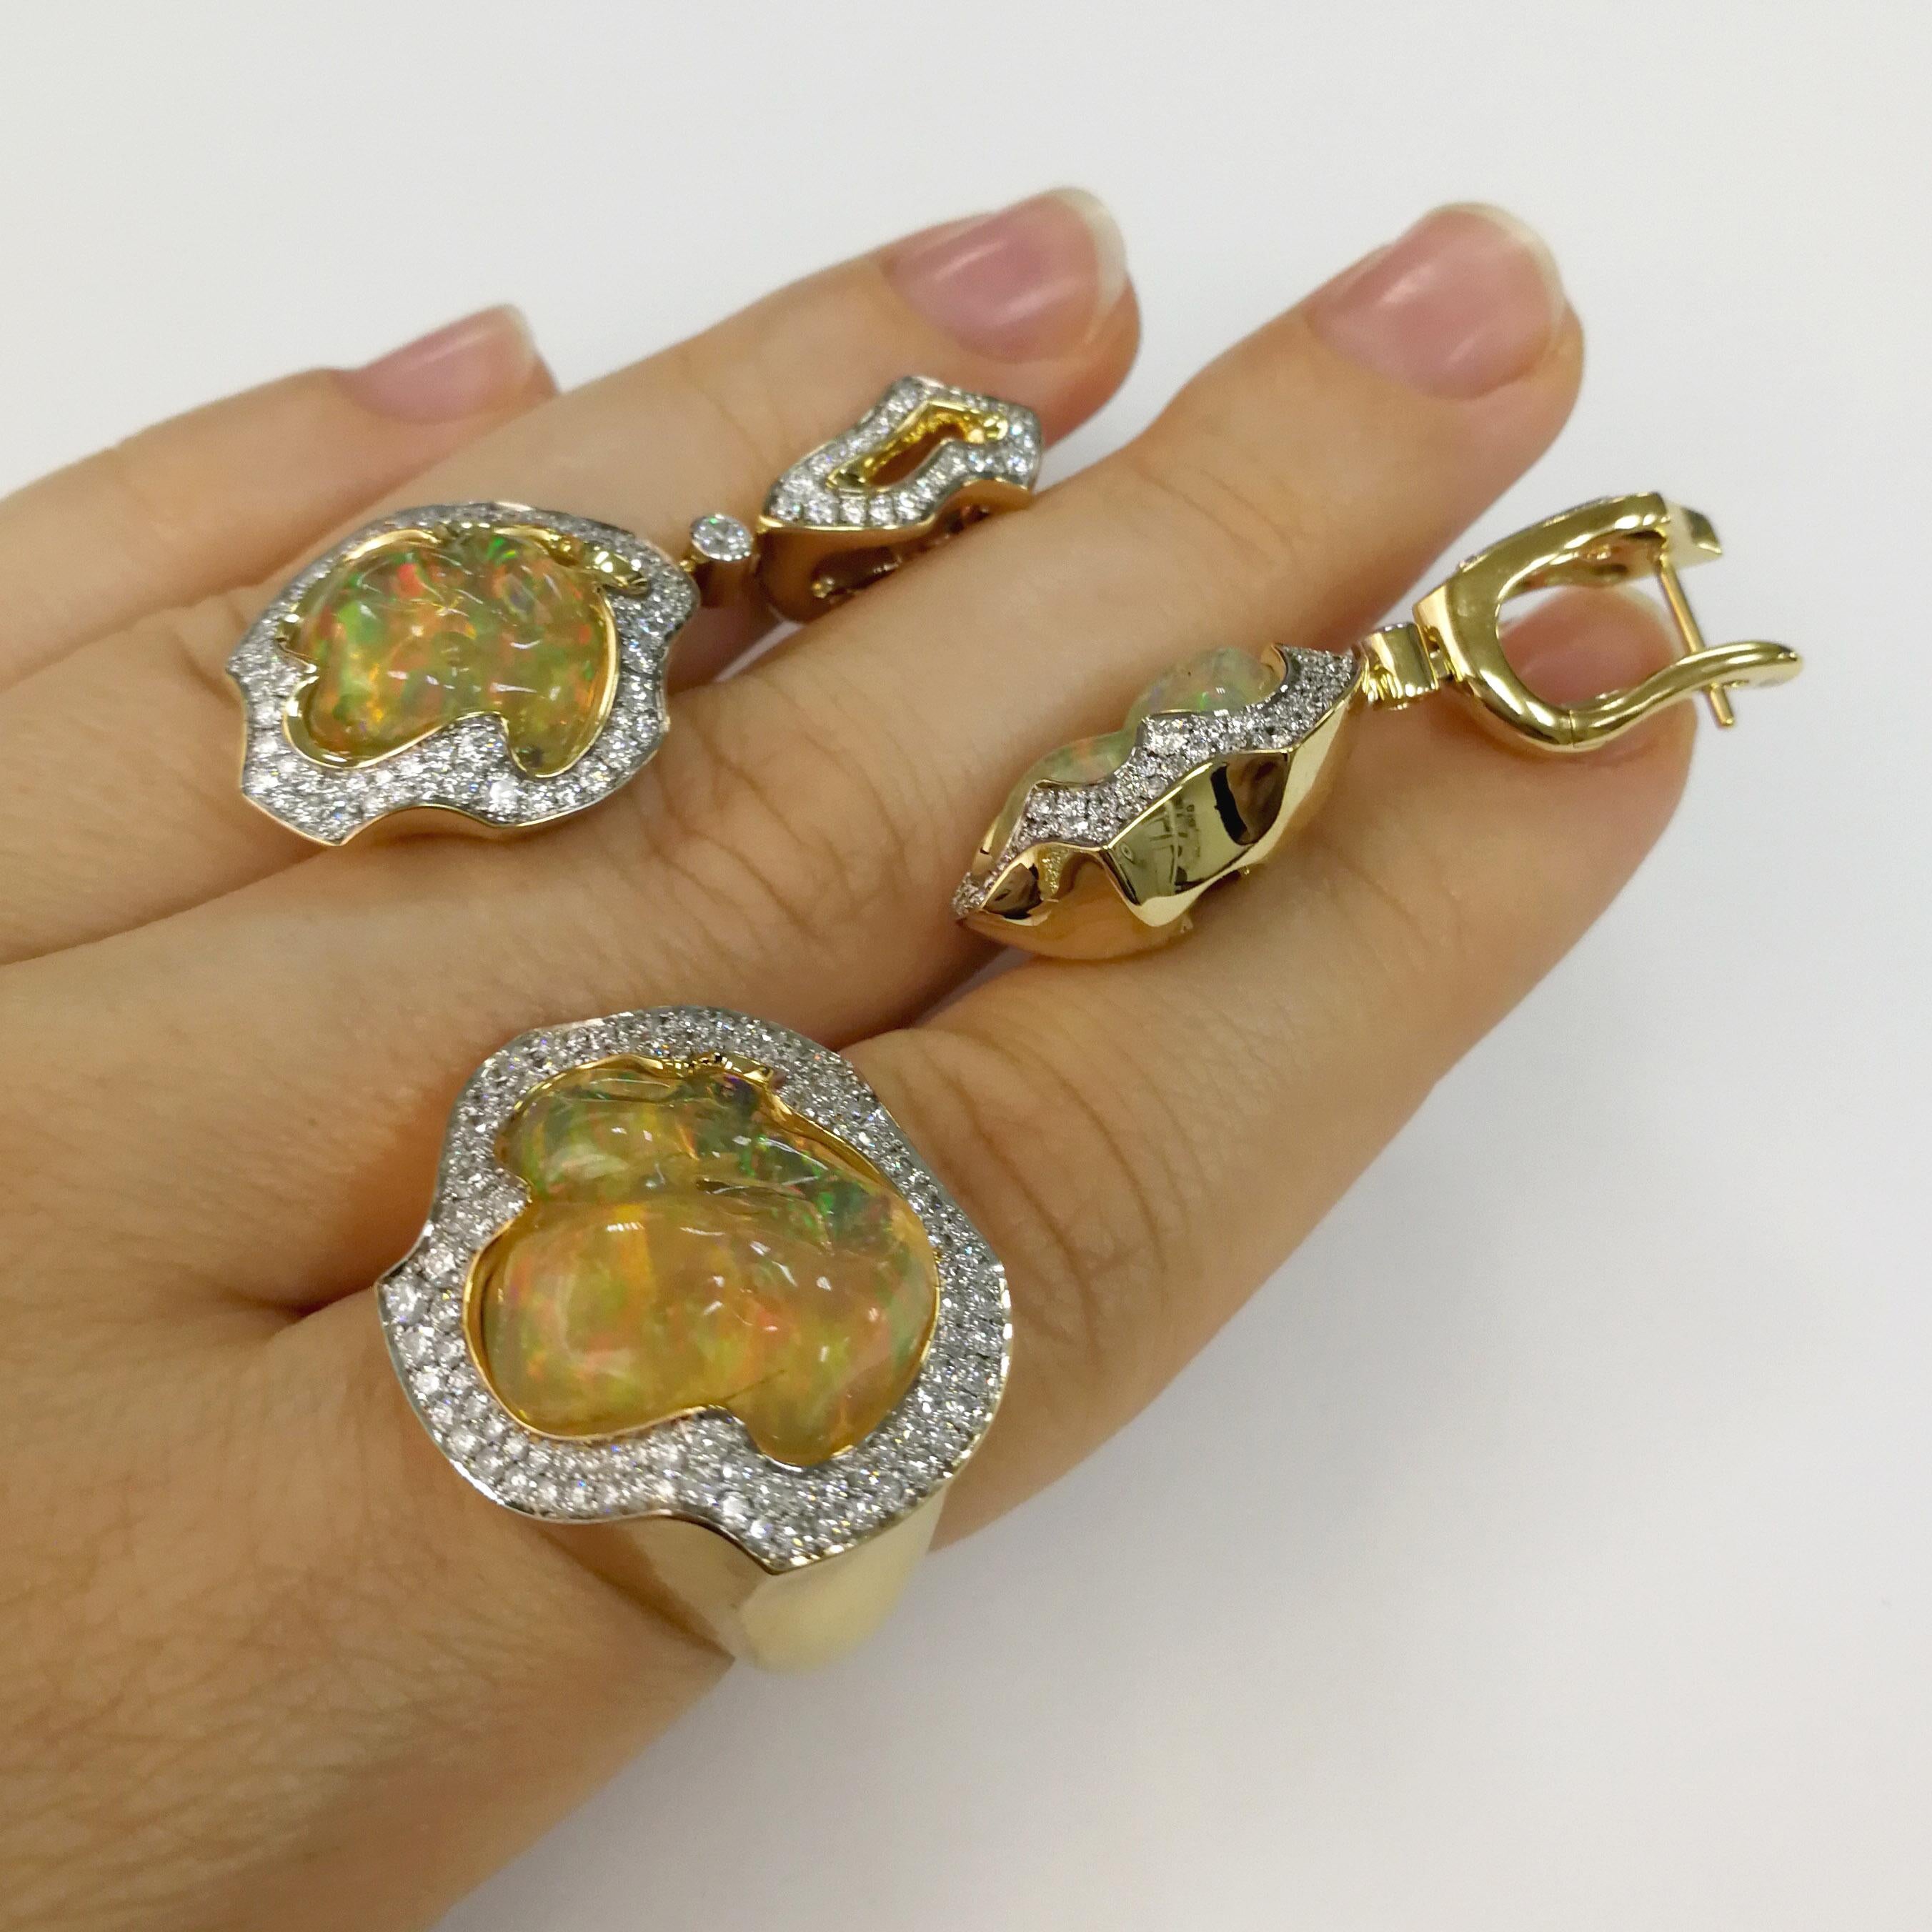 Sugarloaf Cabochon Mexican Opal 25.07 Carat Diamonds One of a Kind 18 Karat Yellow Gold Suite For Sale